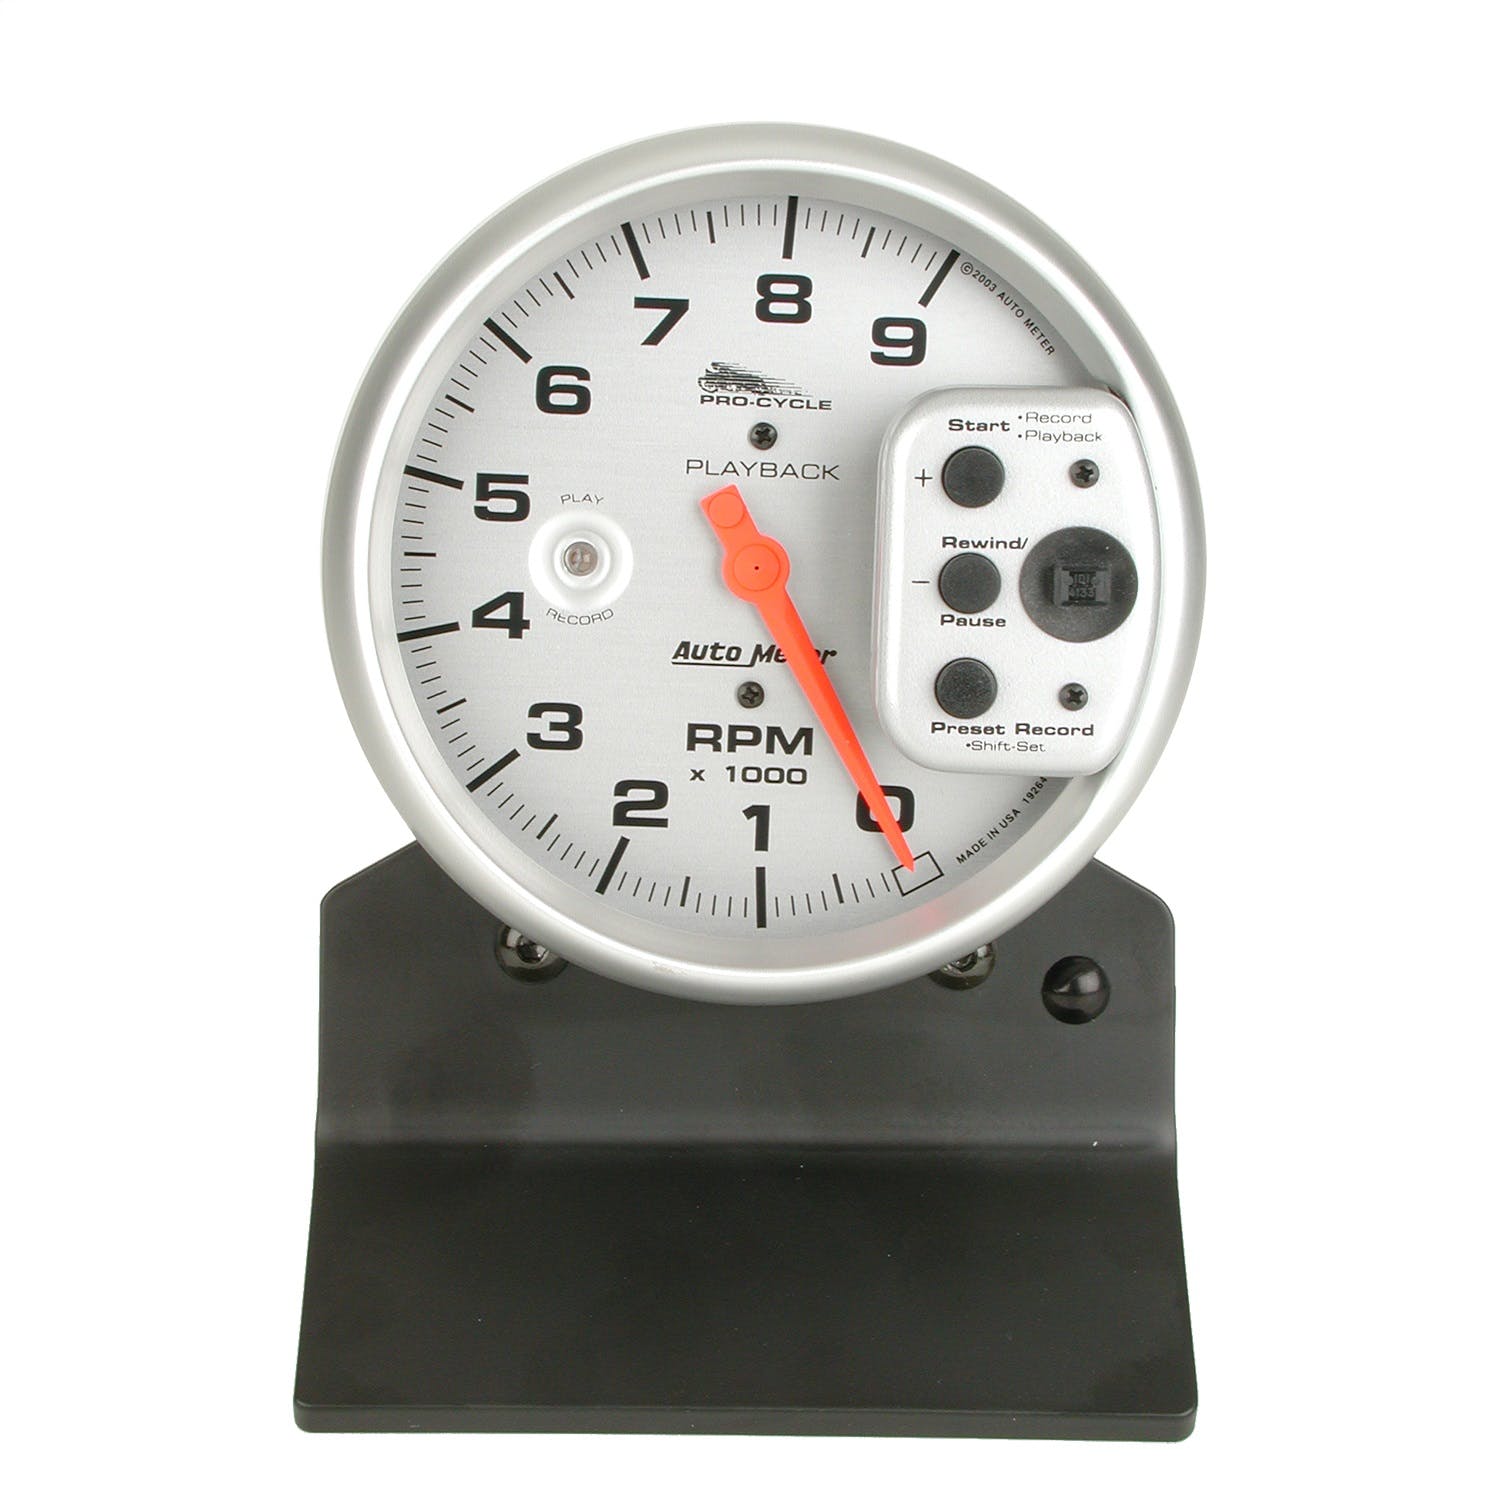 AutoMeter Products 19264 Tachometer Gauge, Silver-Pro Cycle 5, 9K RPM, Pedestal with RPM Playback